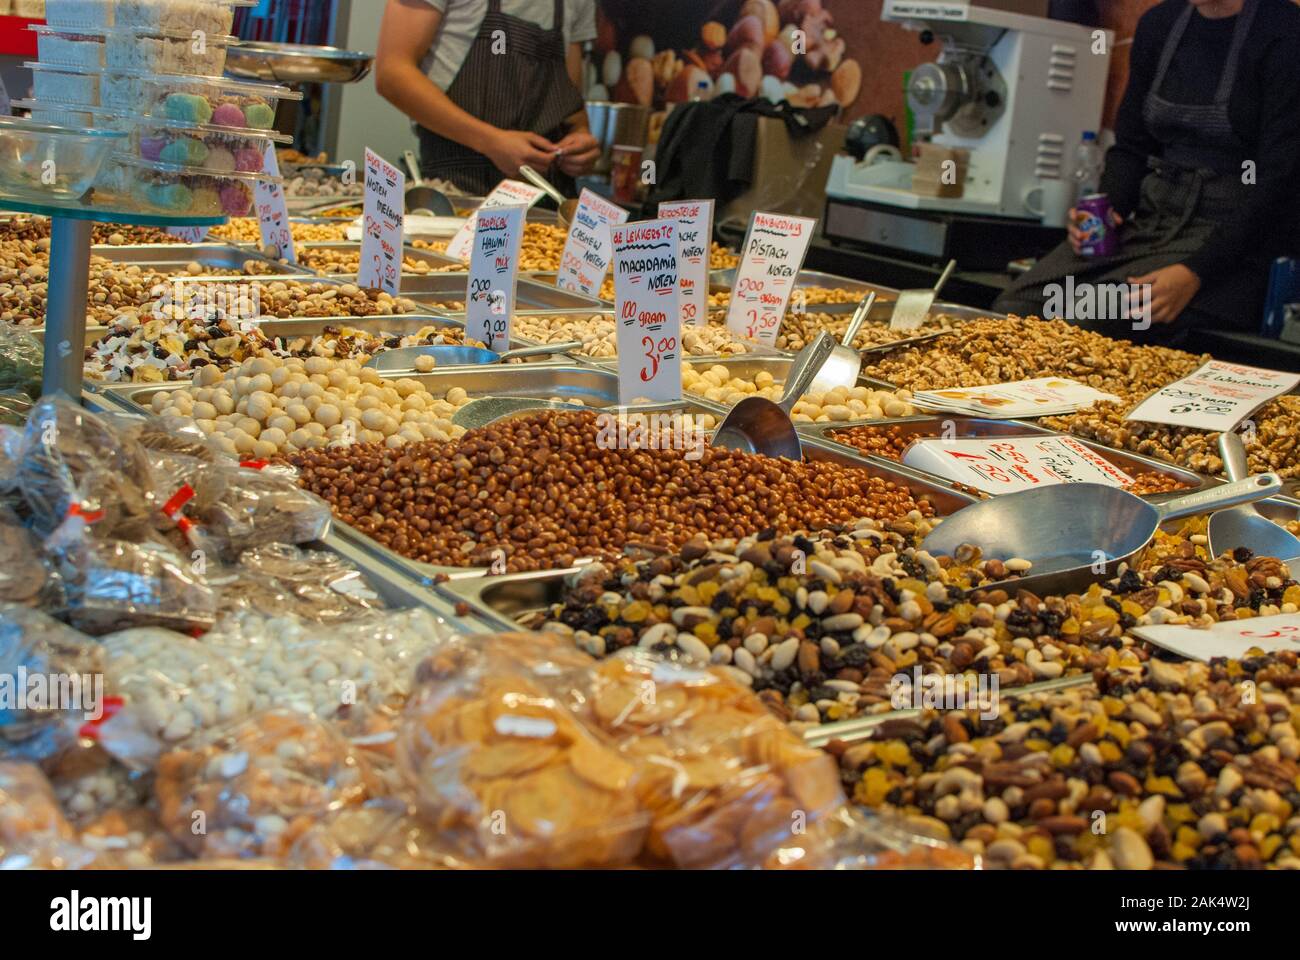 Different types of nuts displayed to sell Stock Photo